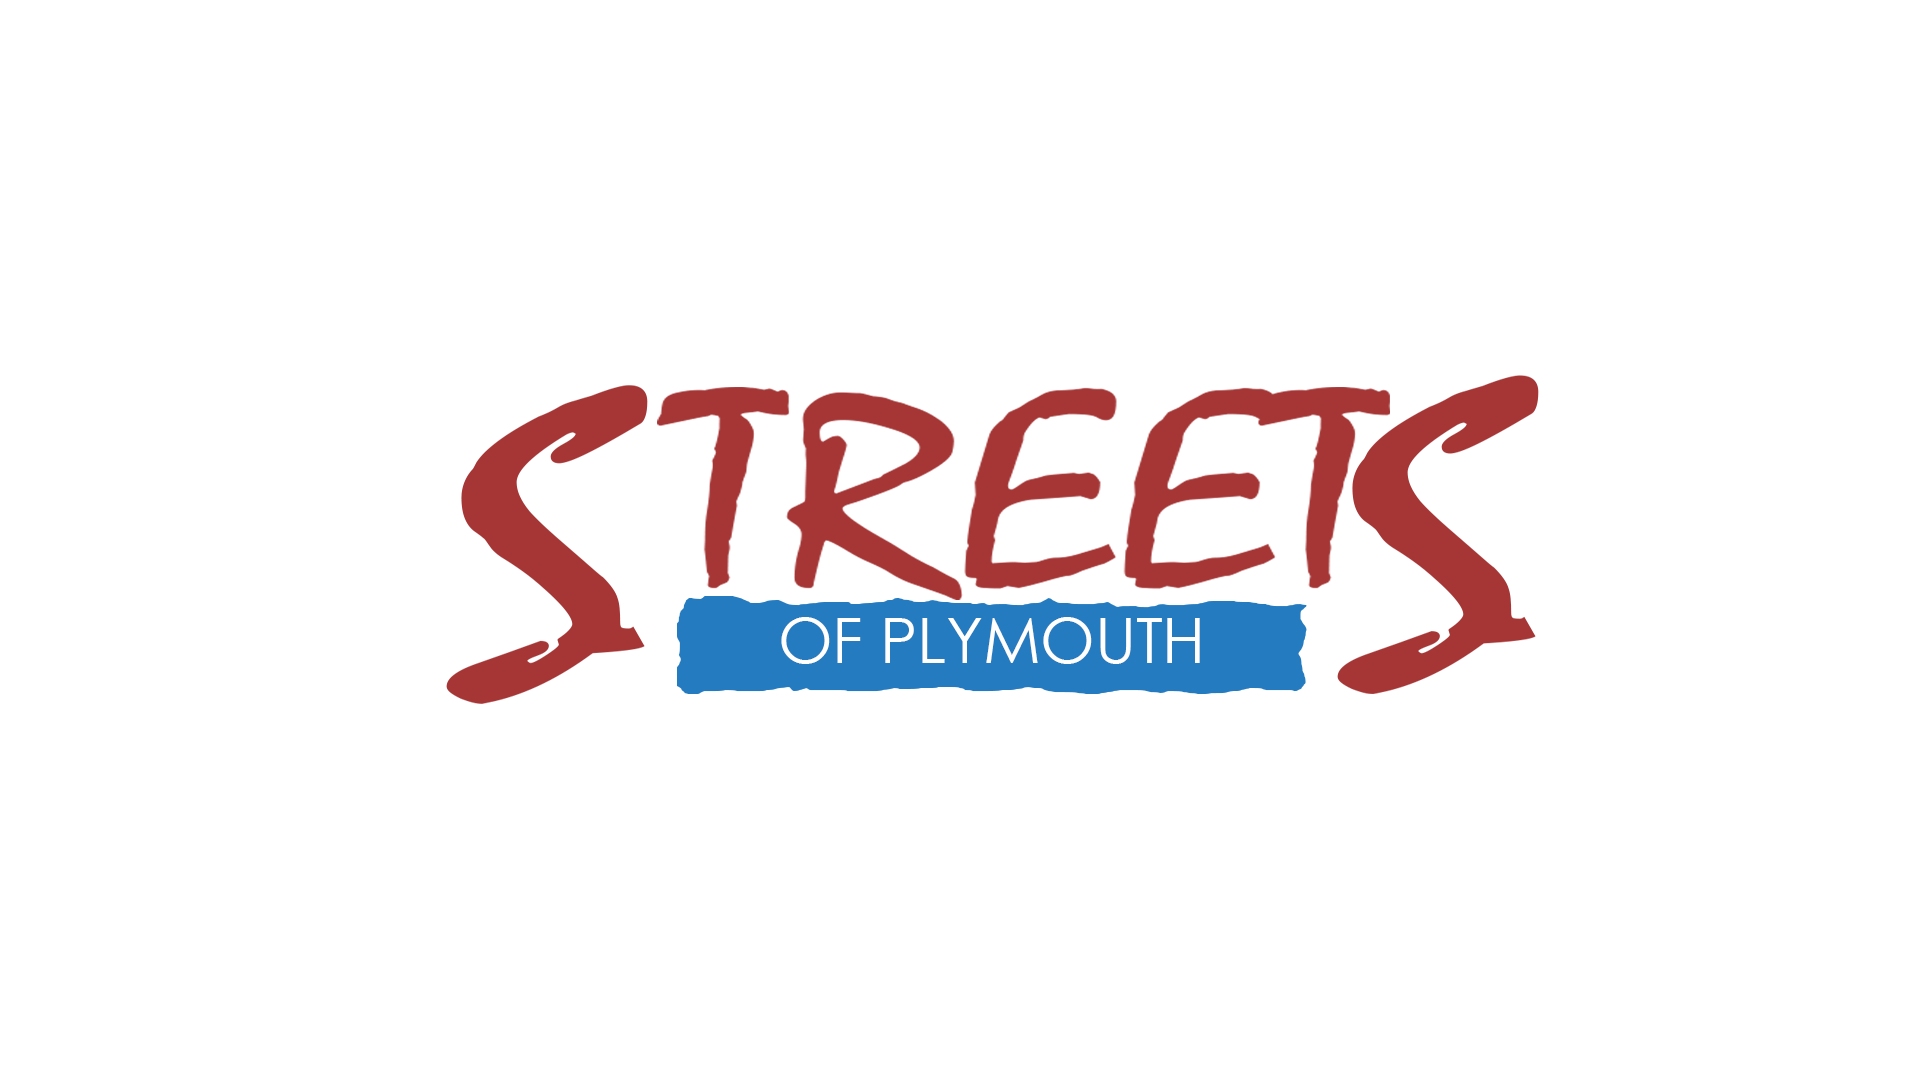 Streets of Plymouth